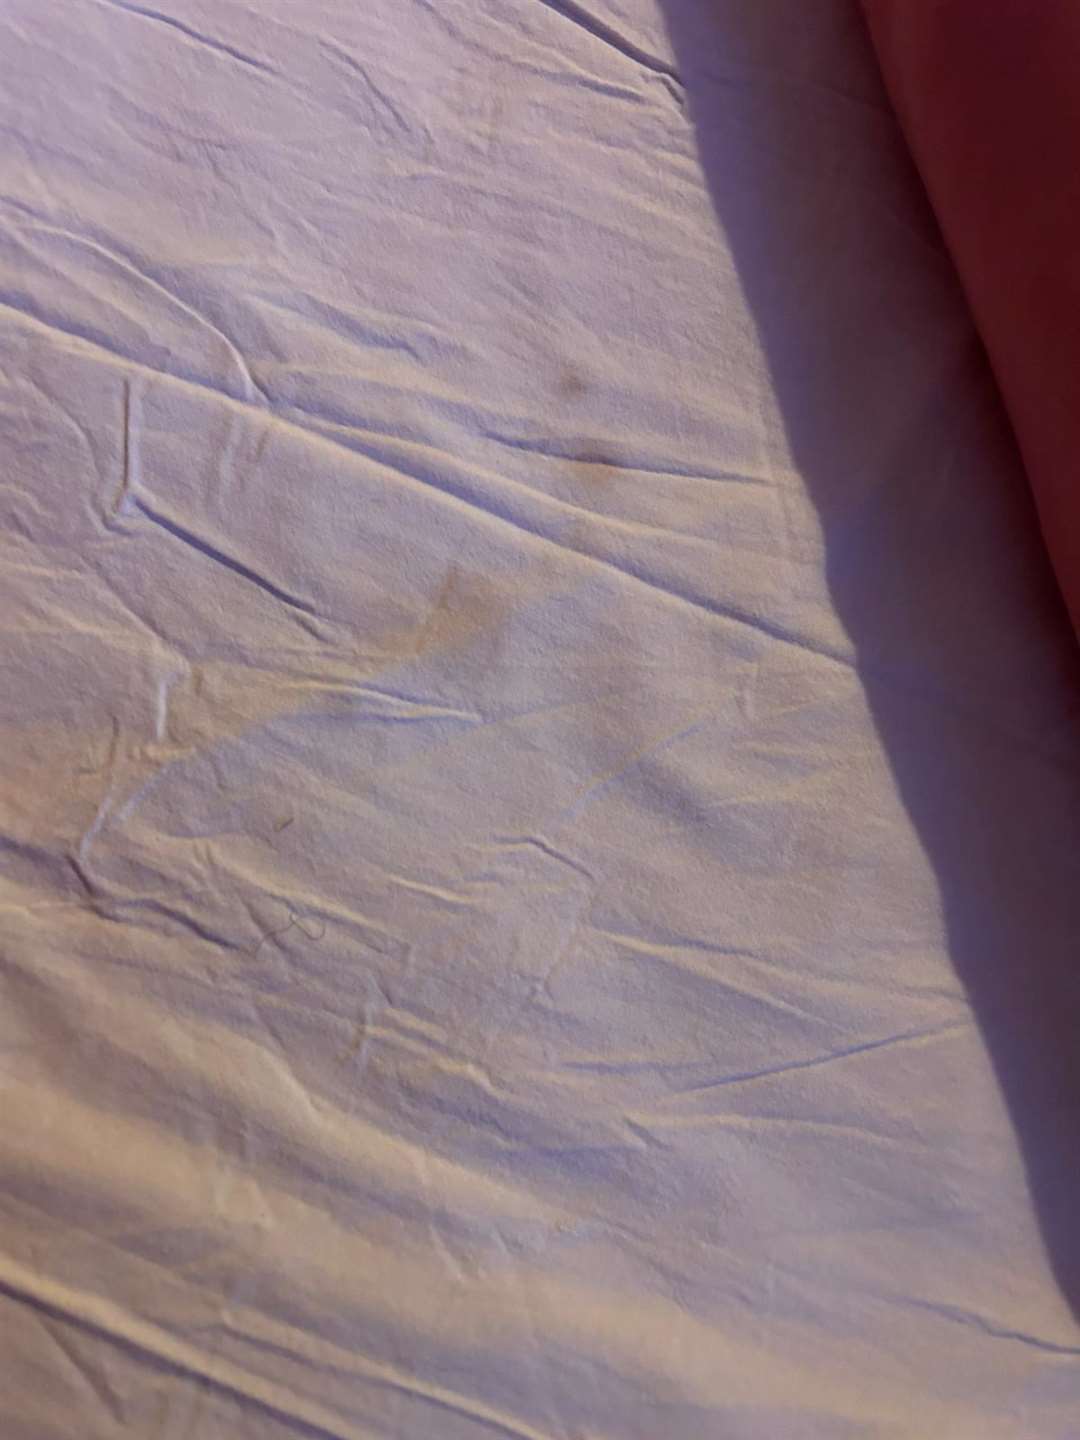 The bedsheets looked as though they could do with a wash